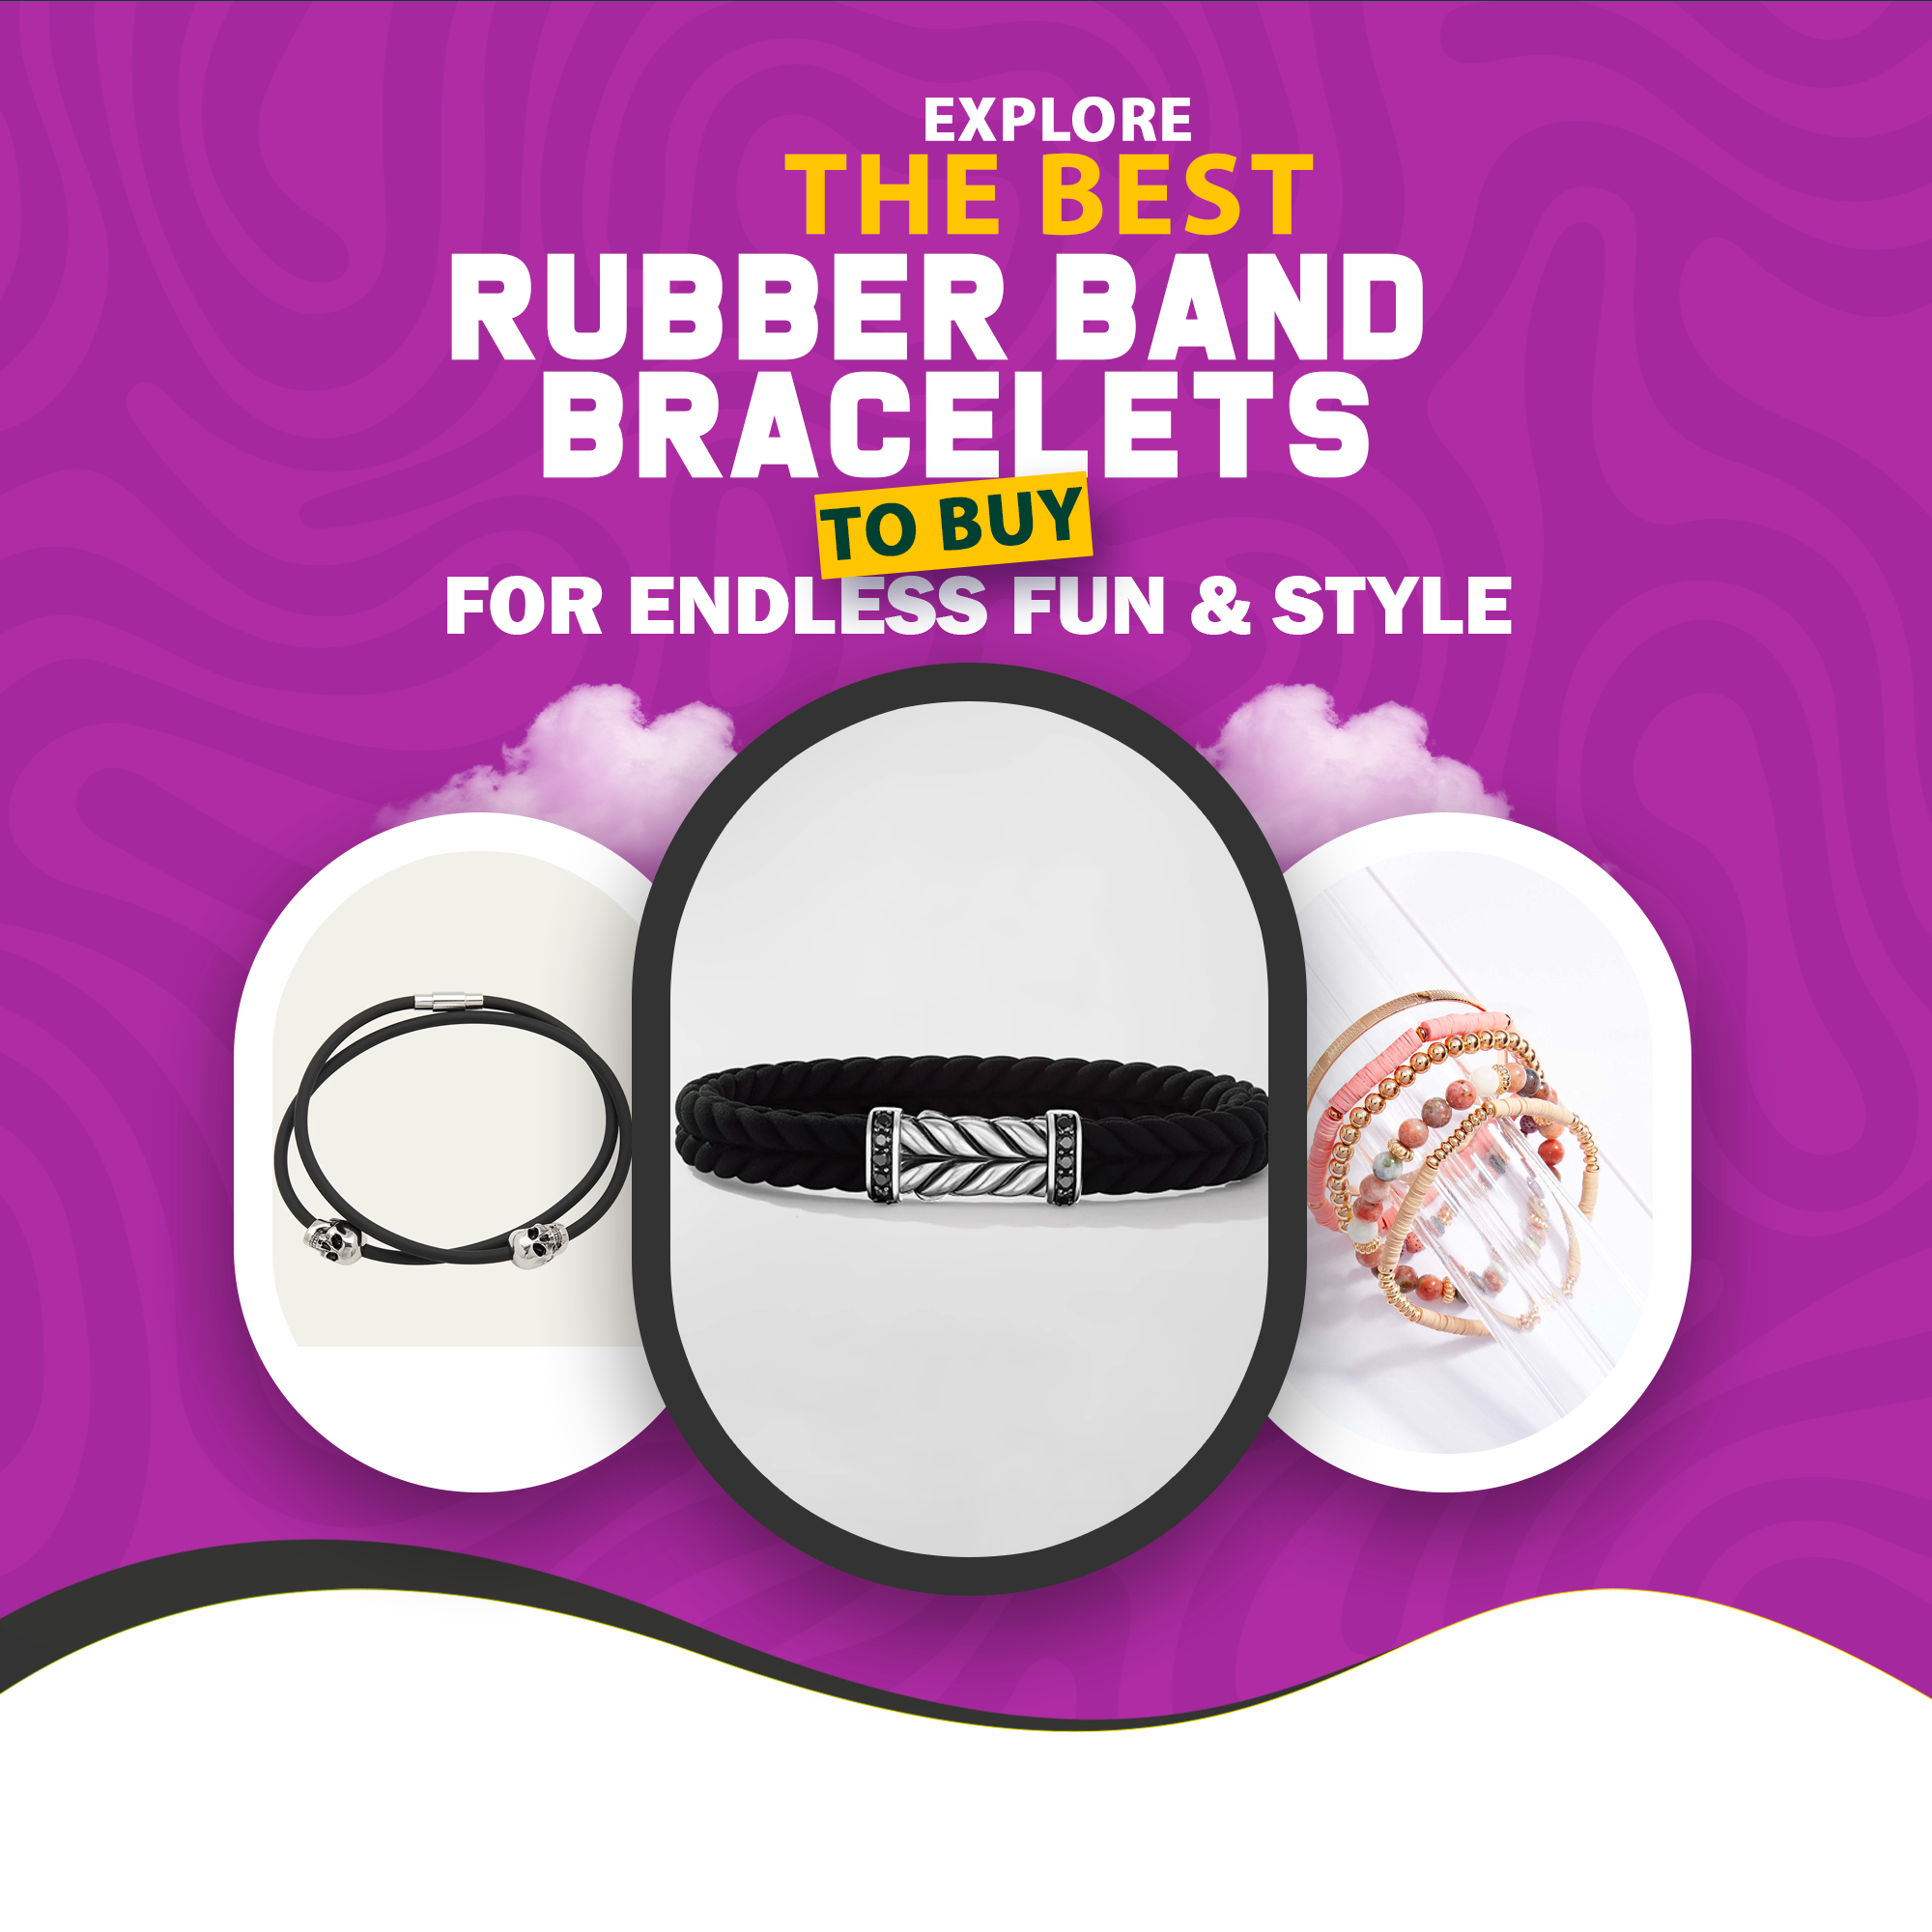 Explore The Best Rubber Band Bracelets To Buy For Endless Fun & Style